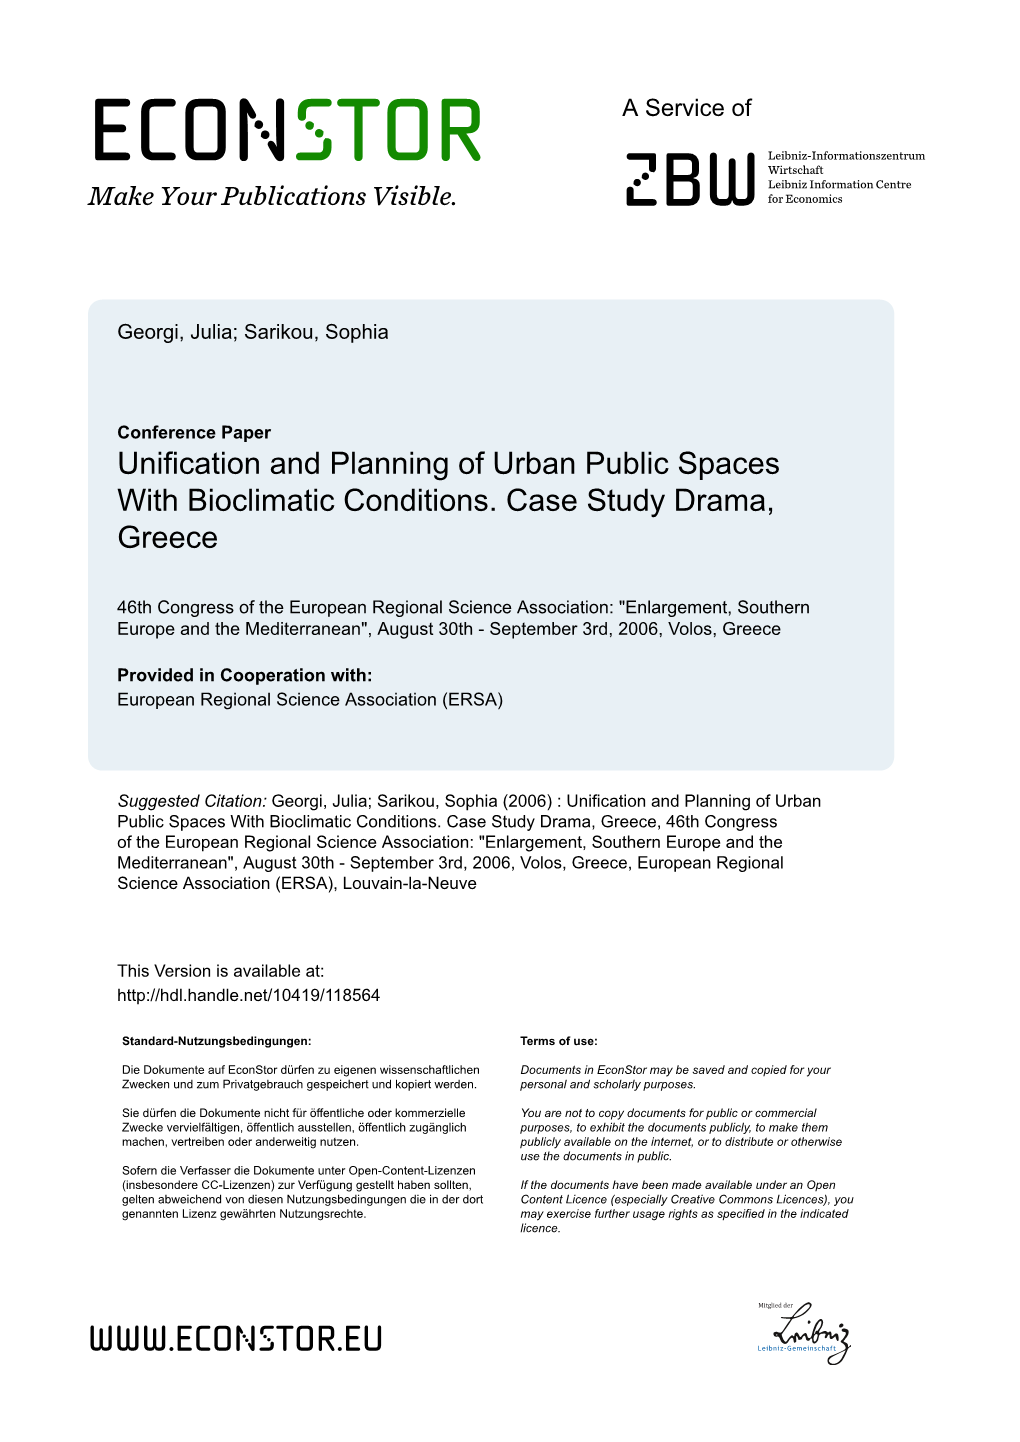 Unification and Planning of Urban Public Spaces with Bioclimatic Conditions